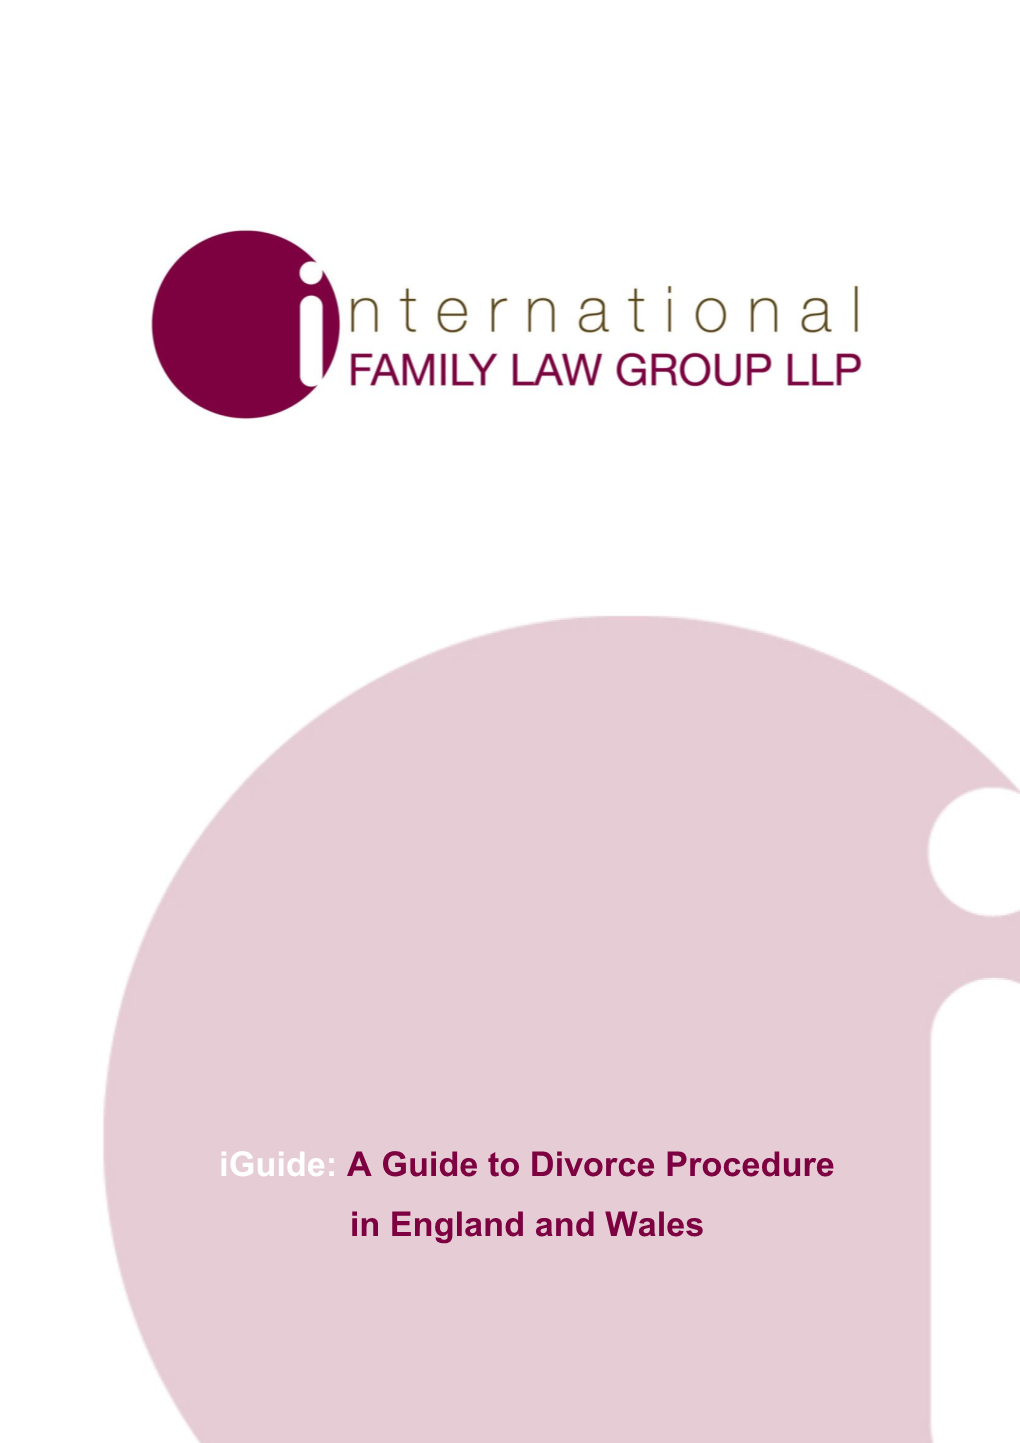 Iguide: a Guide to Divorce Procedure in England and Wales